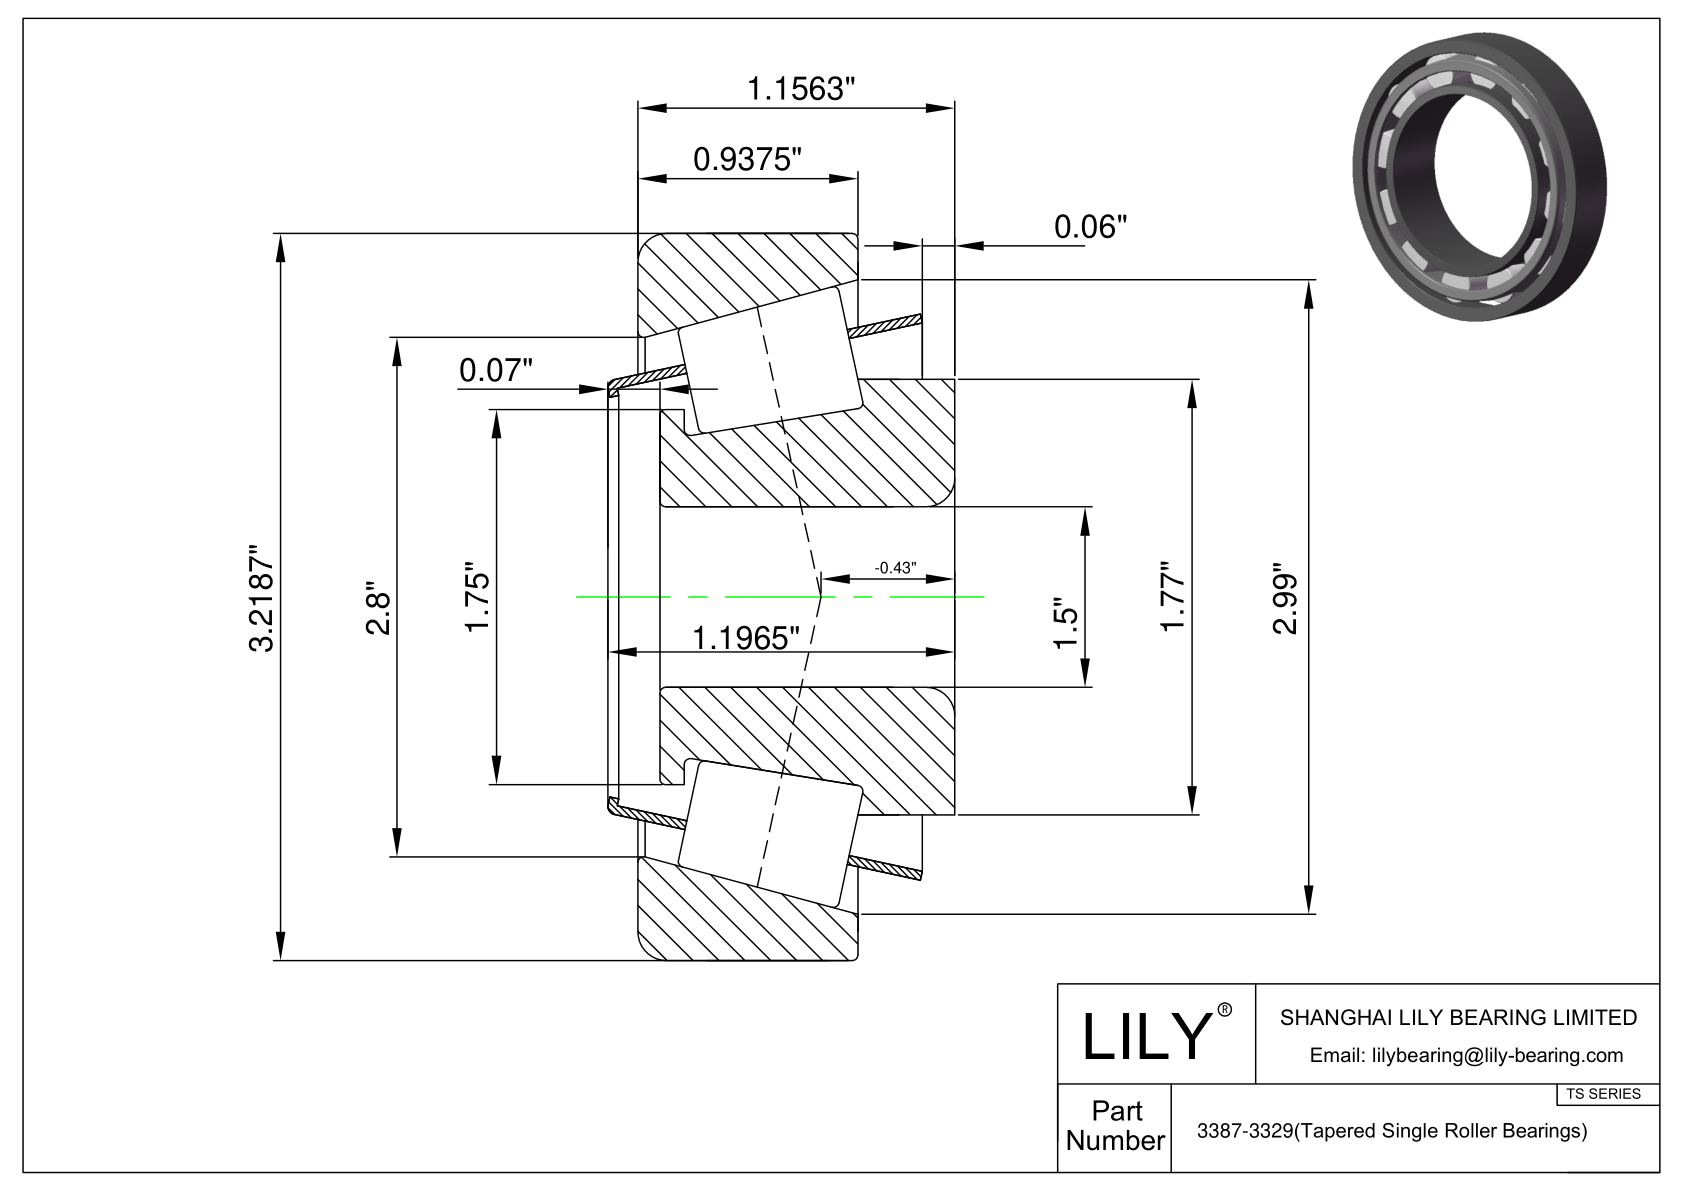 3387-3329 TS (Tapered Single Roller Bearings) (Imperial) cad drawing